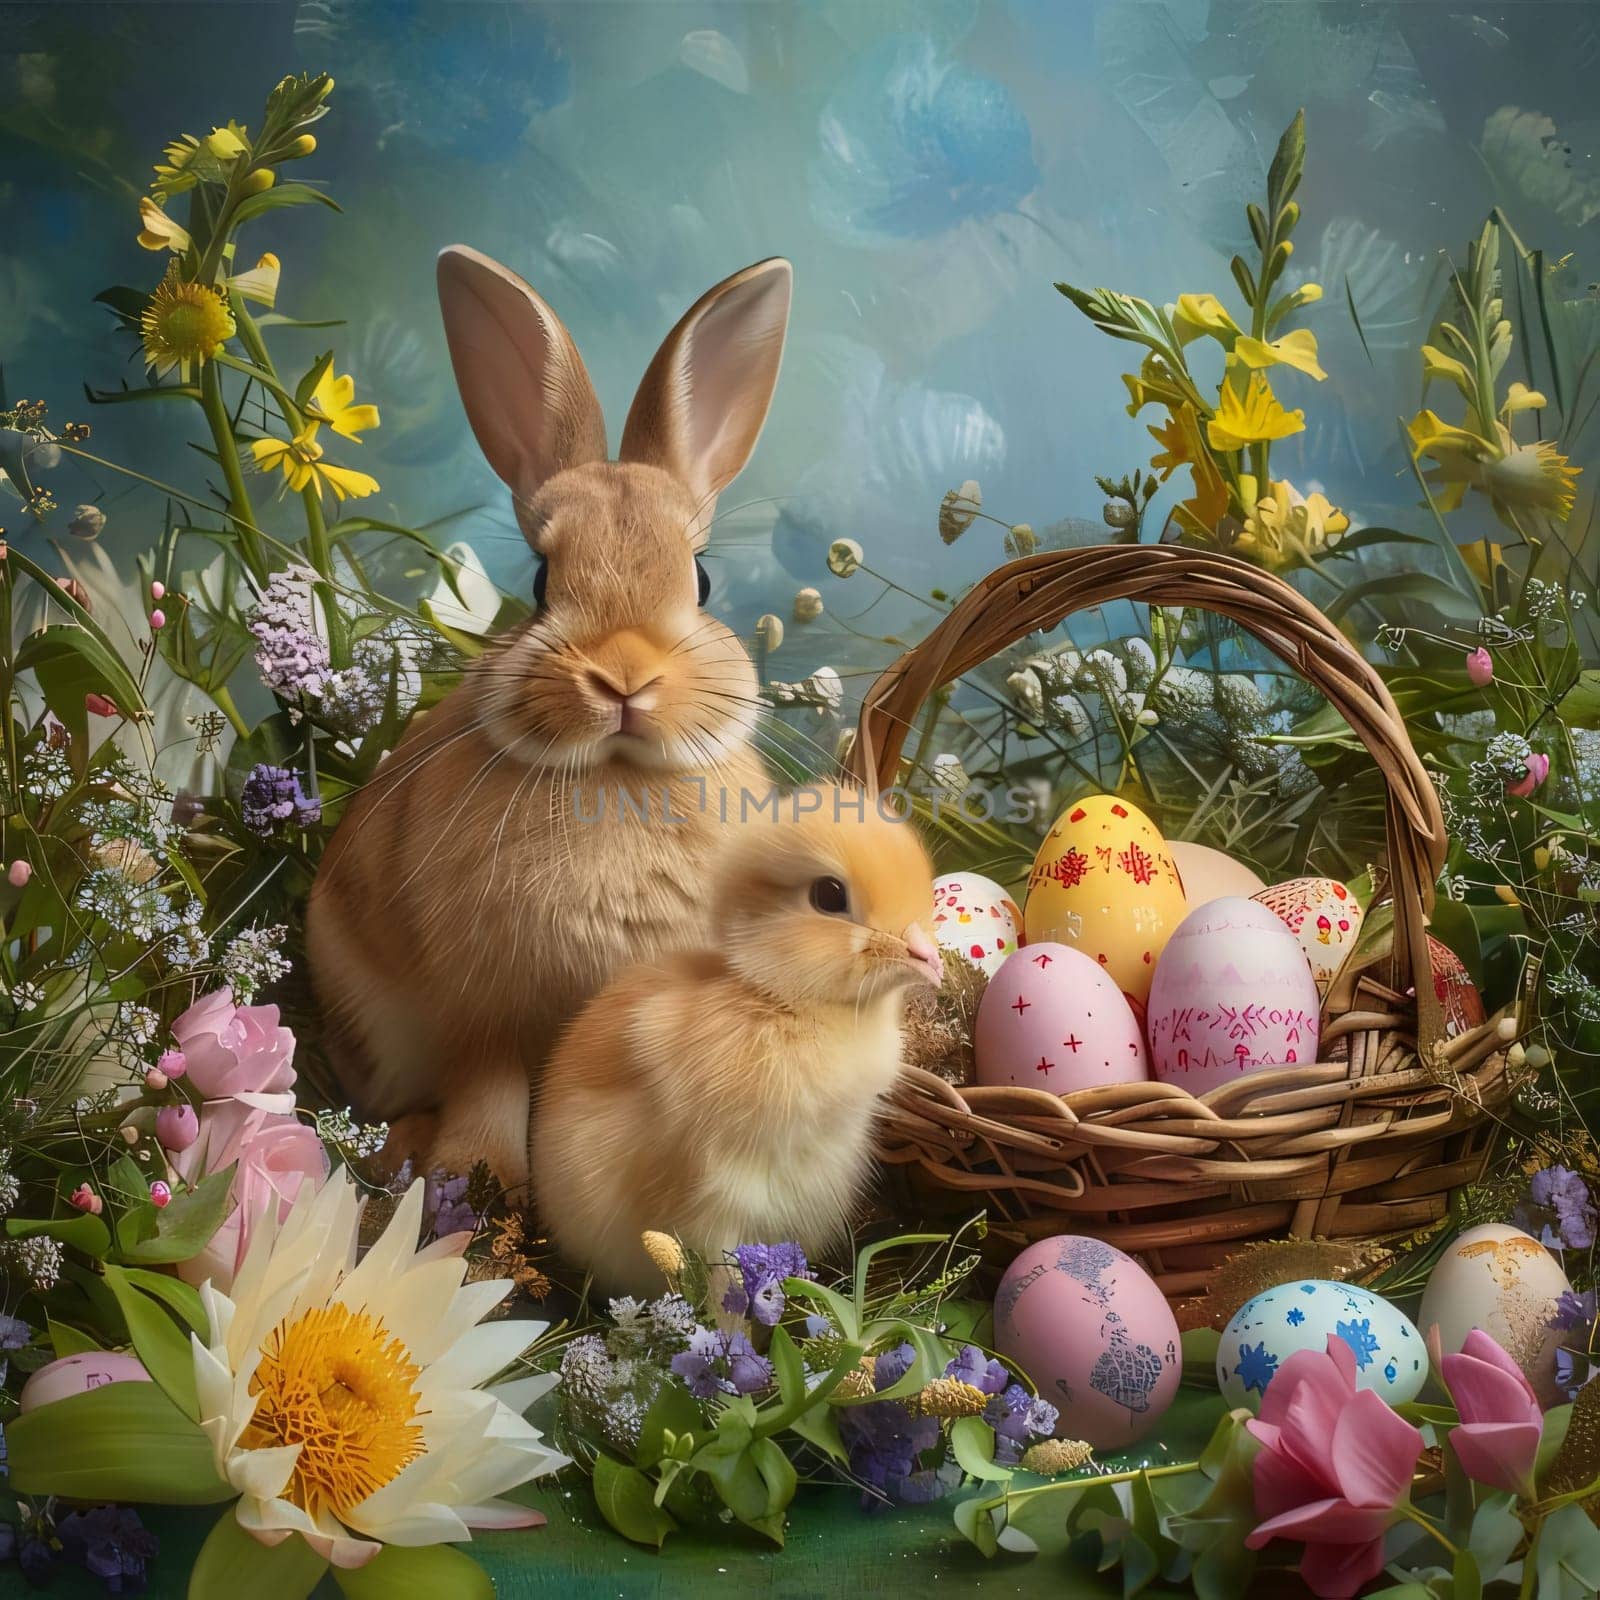 Feasts of the Lord's Resurrection: Easter bunny and eggs in a basket on a background of spring flowers